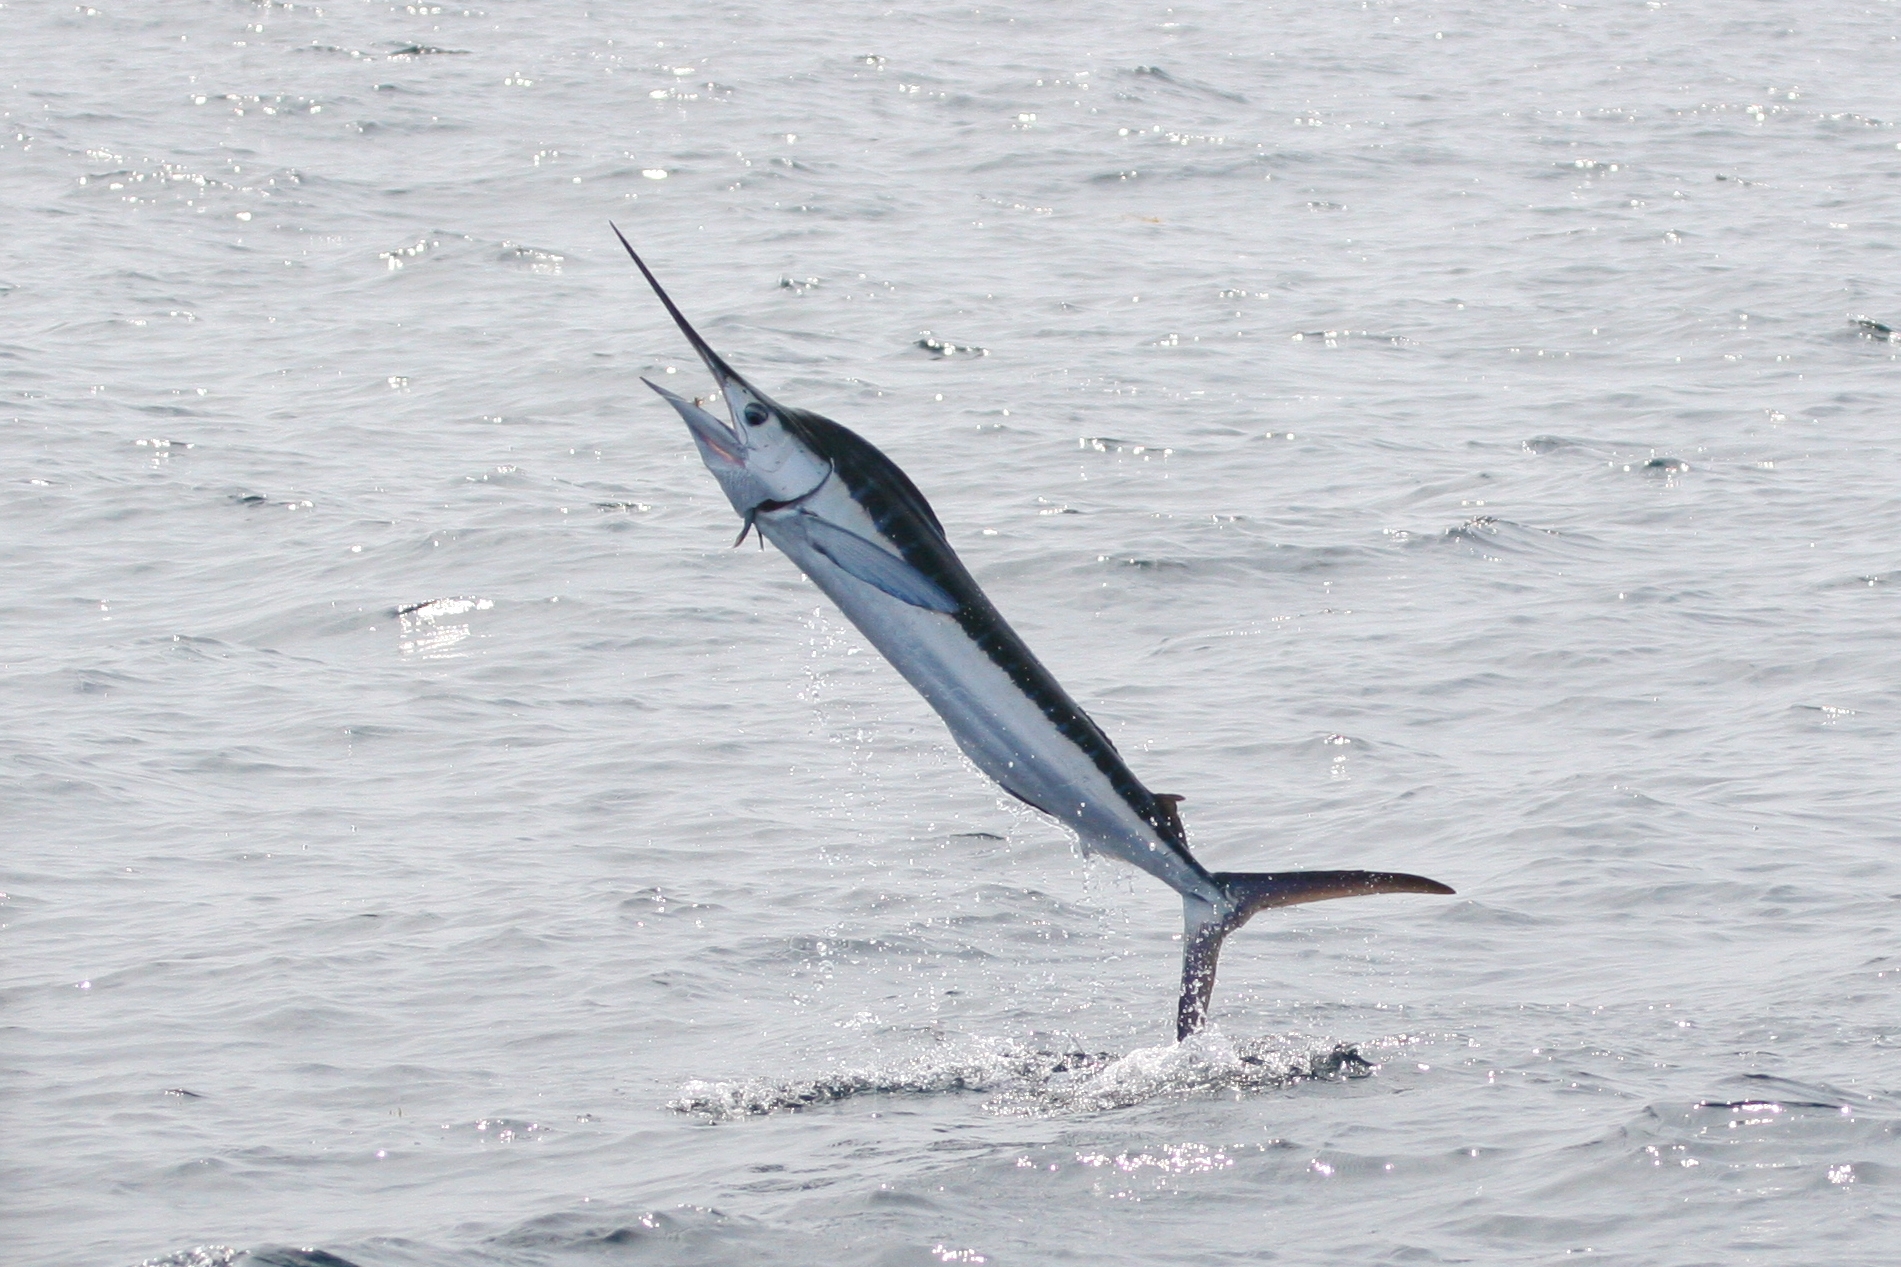 A white marlin jumps from the water off the coast of NC